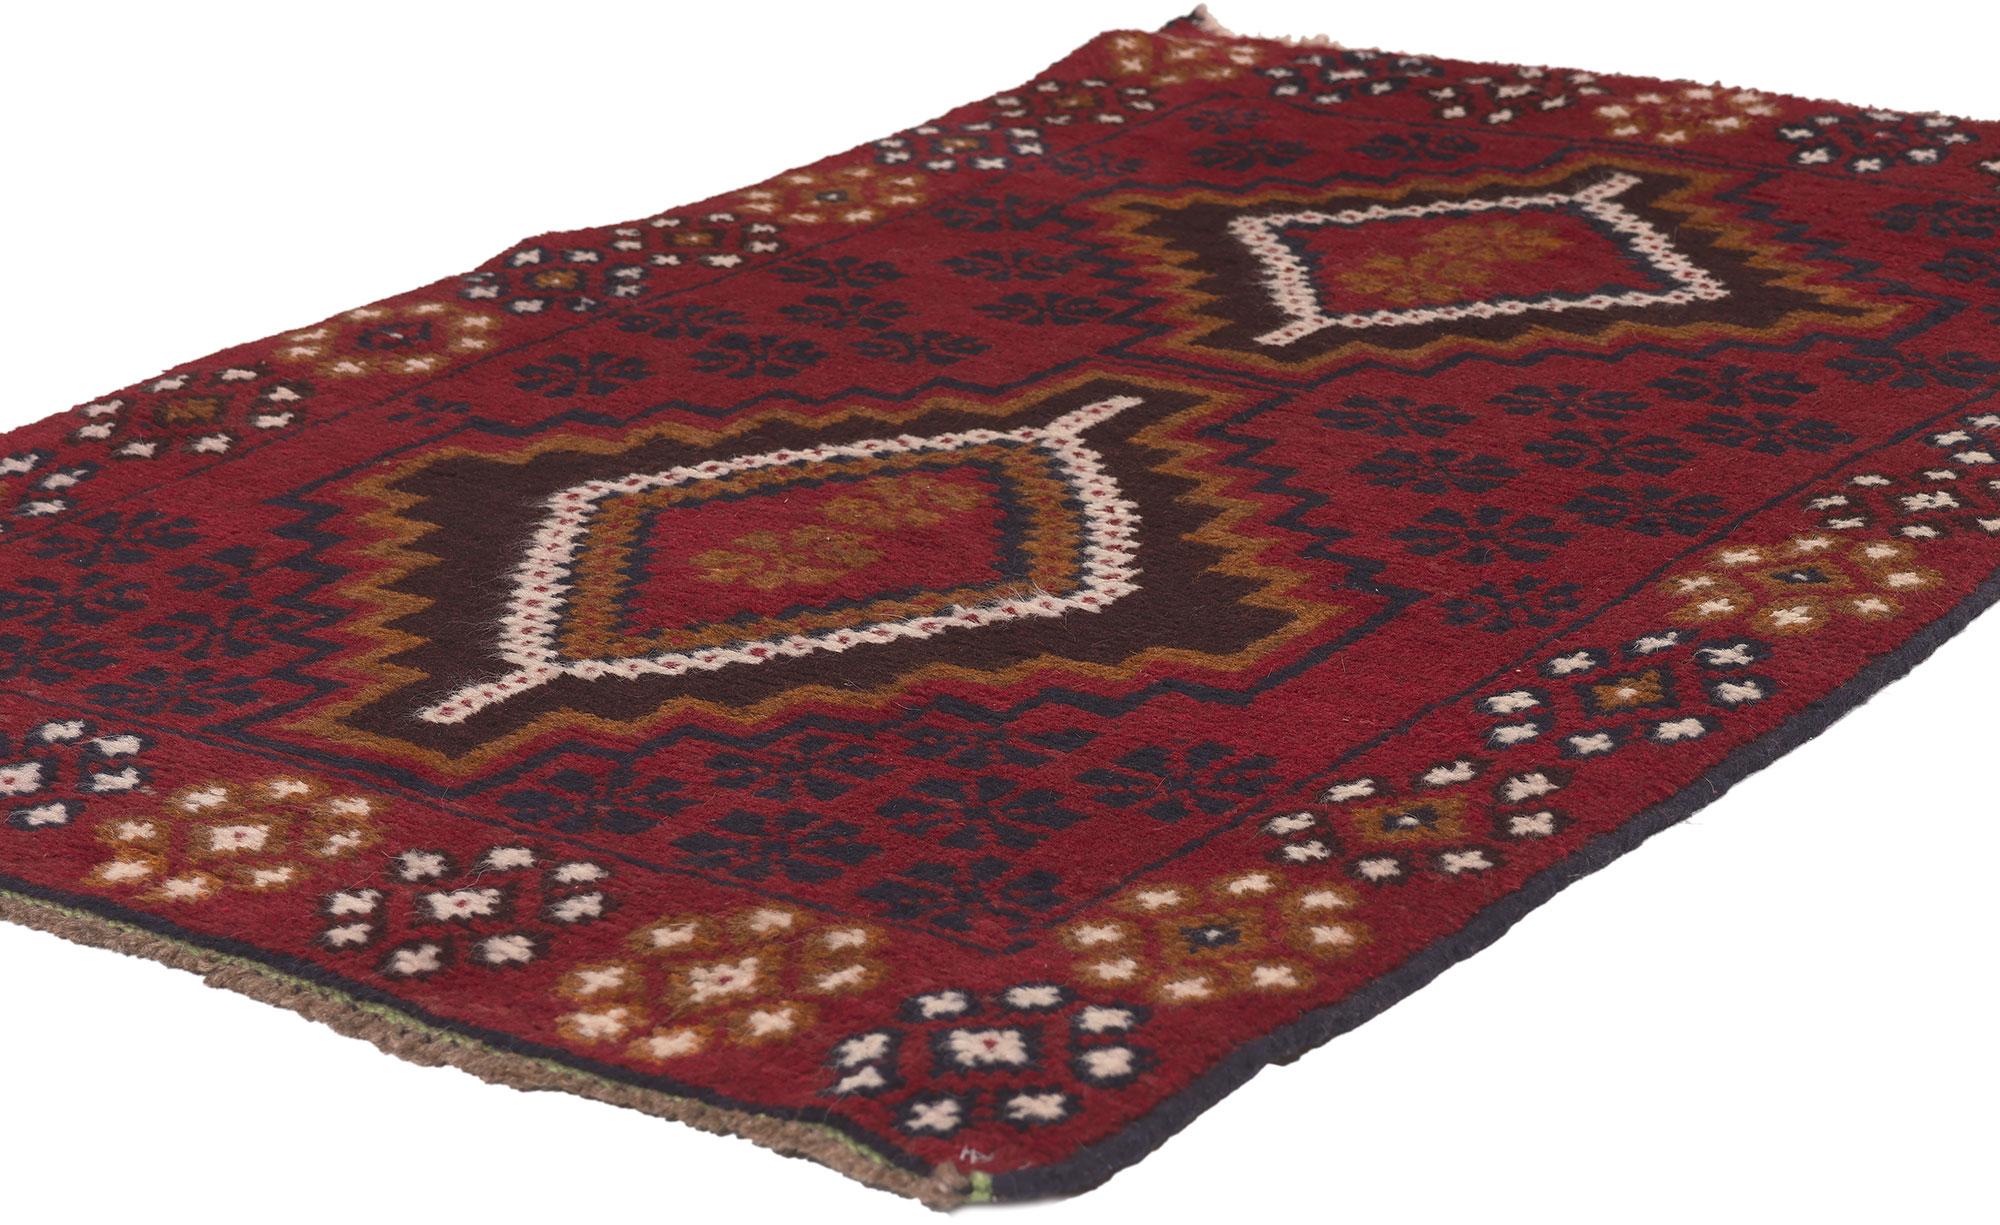 78631 Vintage Afghan Baluch Rug, 02'09 x 04'07.
Emanating Afghani culture with incredible deta​il and texture, this small vintage Baluch rug will take on a curated lived-in look imparting a sense of warmth and welcomed informality. The tribal design